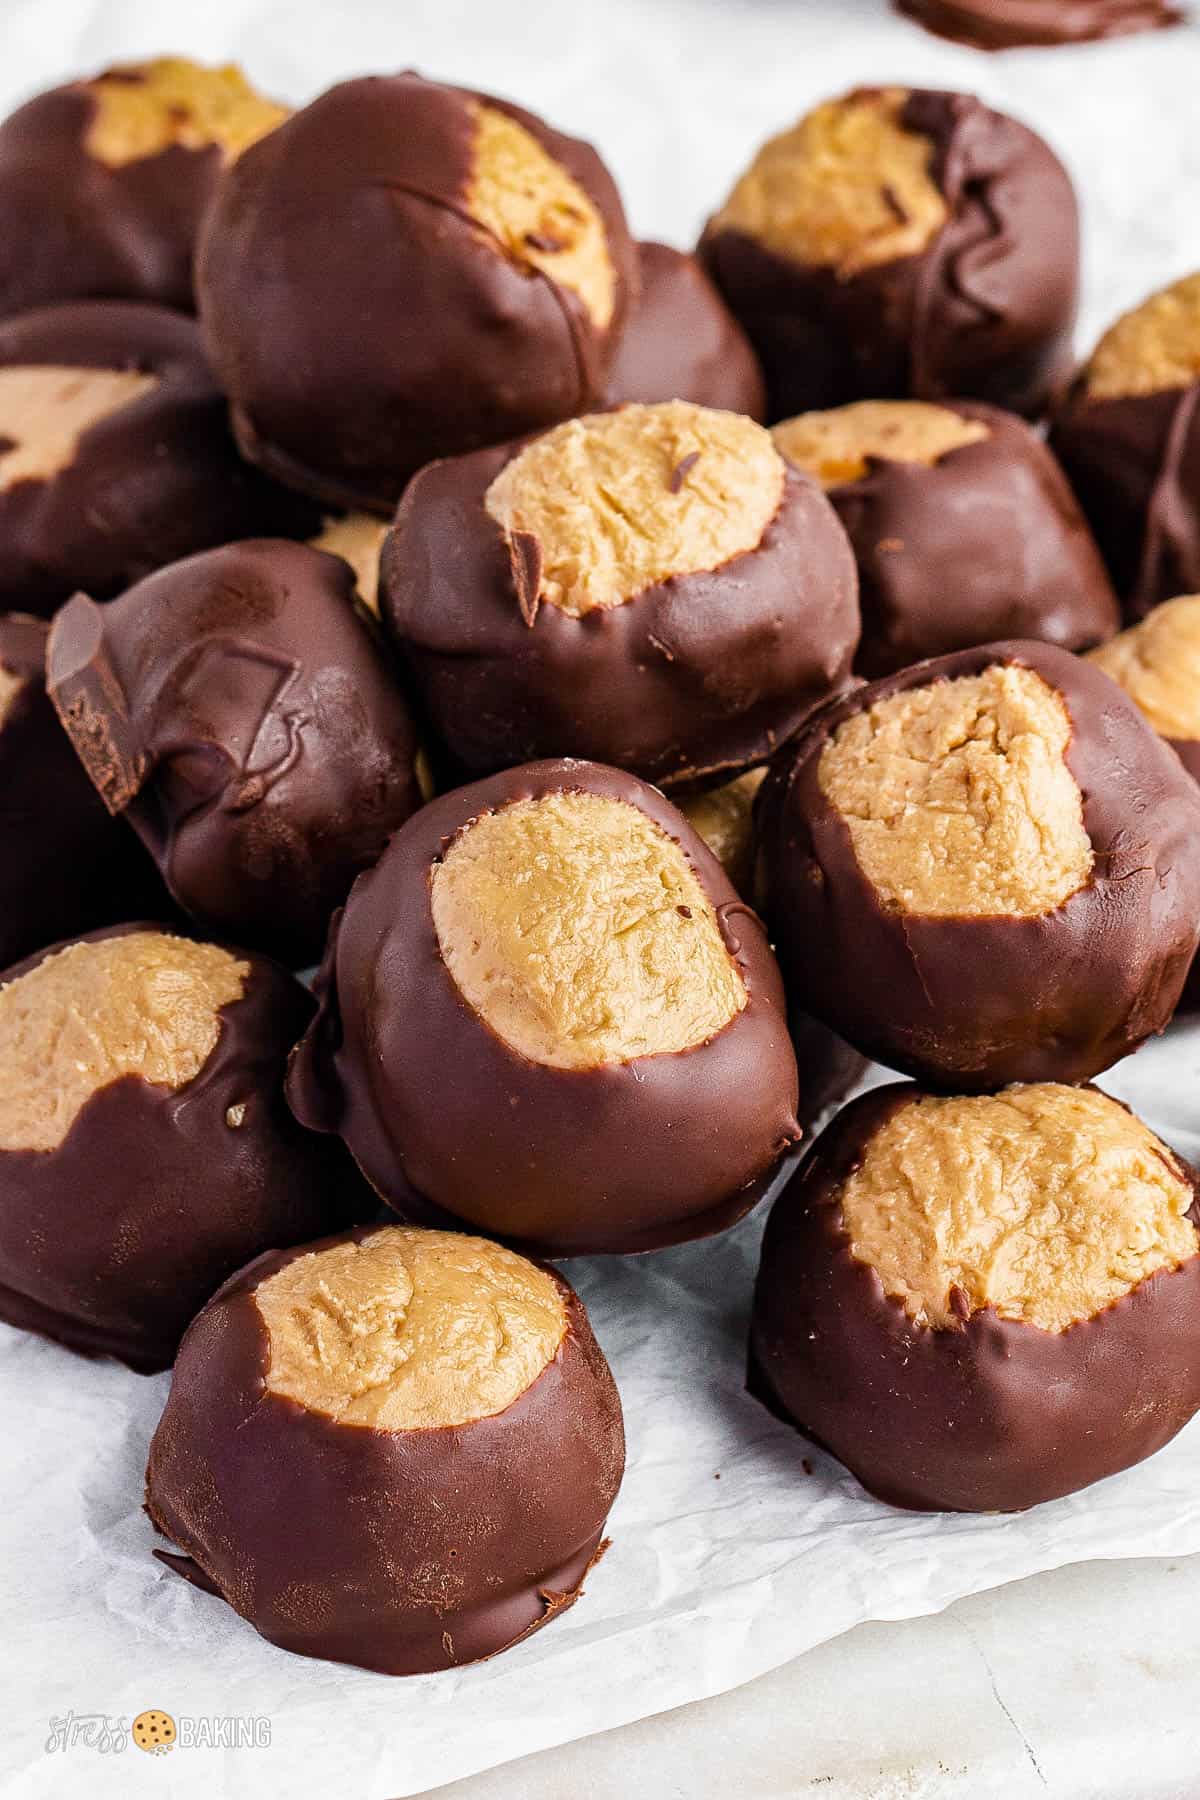 A pile of buckeye balls on parchment paper